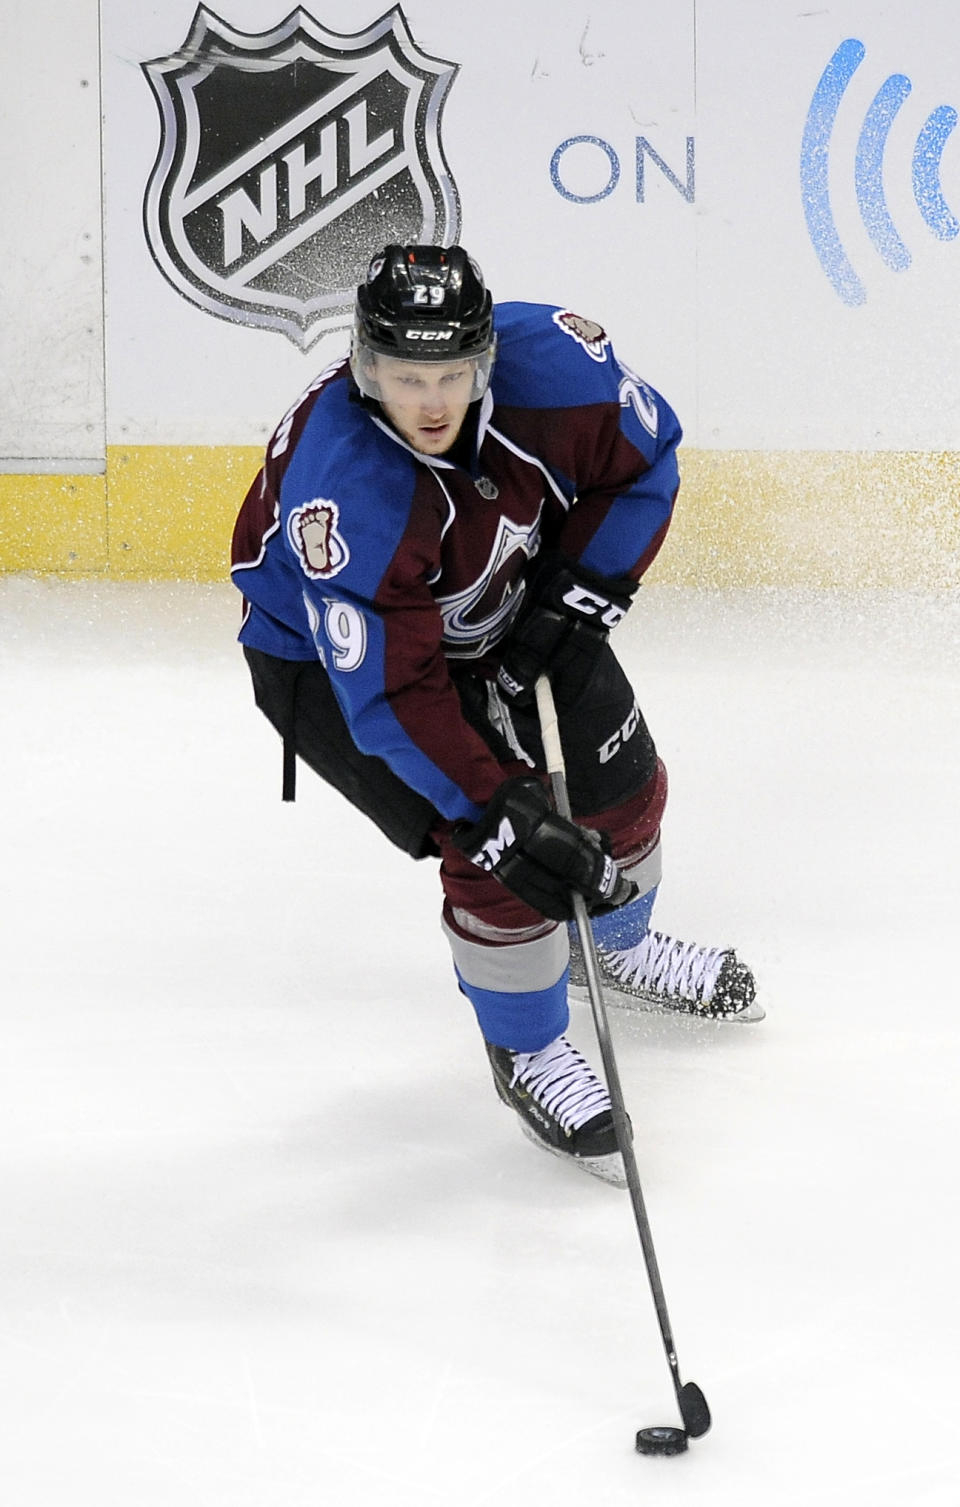 Colorado Avalanche center Nathan MacKinnon skates with the puck in overtime in Game 5 of an NHL hockey first-round playoff series against the Minnesota Wild on Saturday, April 26, 2014, in Denver. The Avalanche won 4-3. (AP Photo/Chris Schneider)